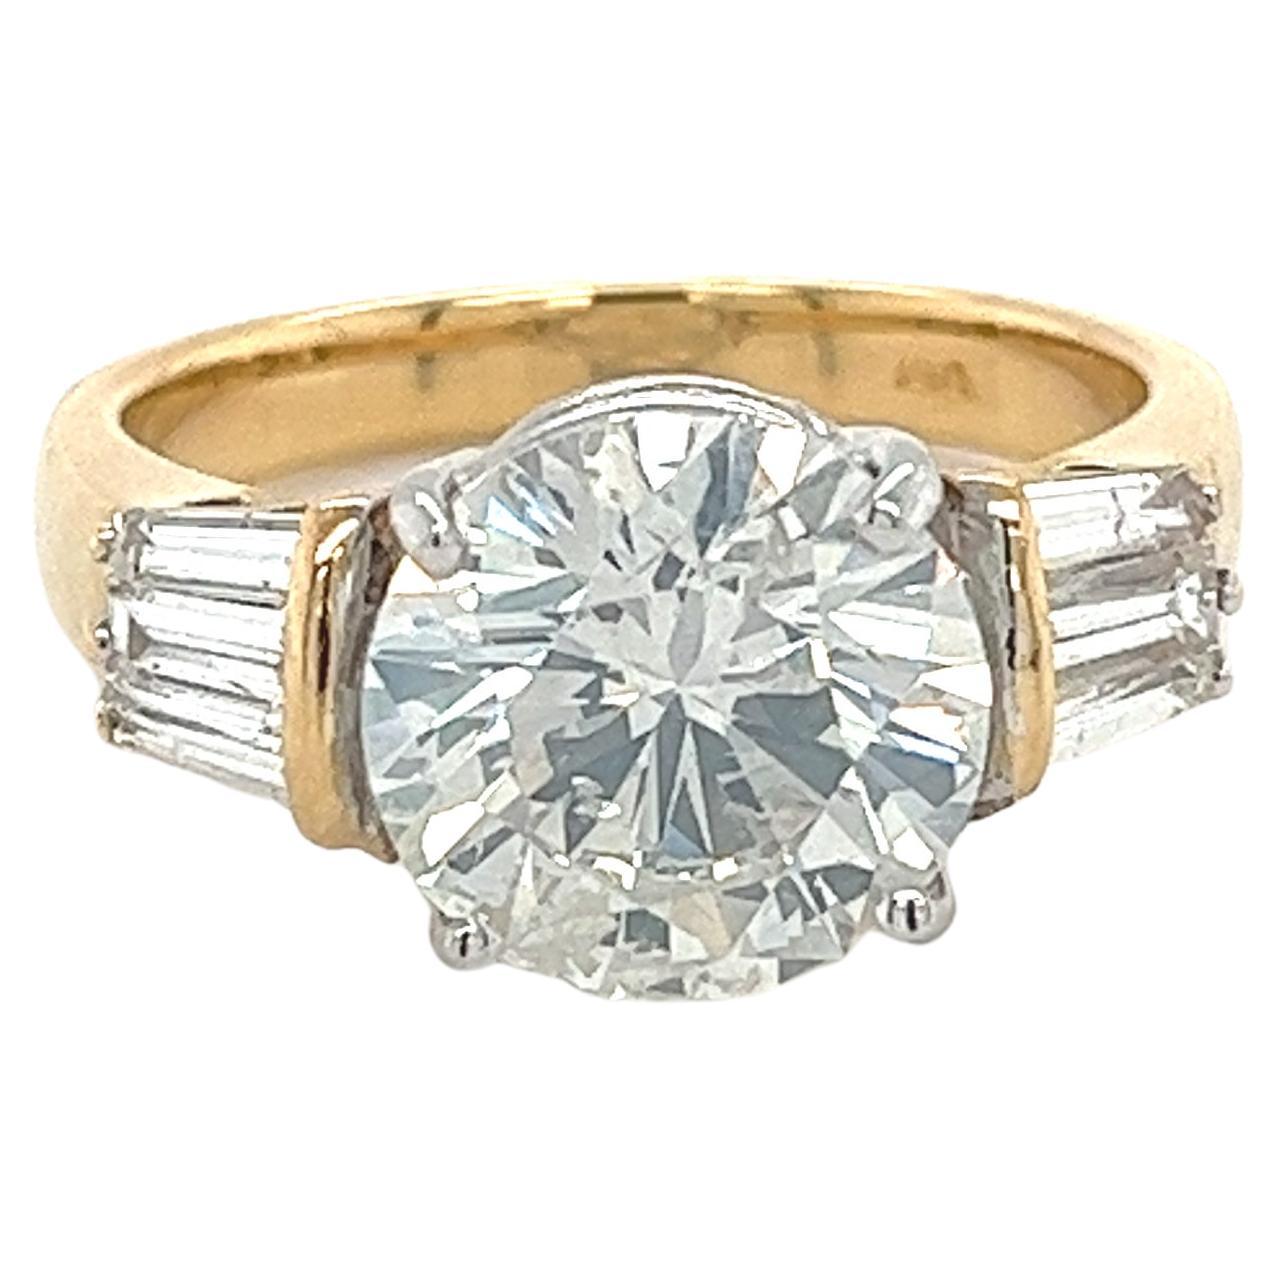 4.21 Carat Round Cut Diamond Engagement Ring With Baguettes in 2 Tone 18k Gold  In New Condition For Sale In Miami, FL